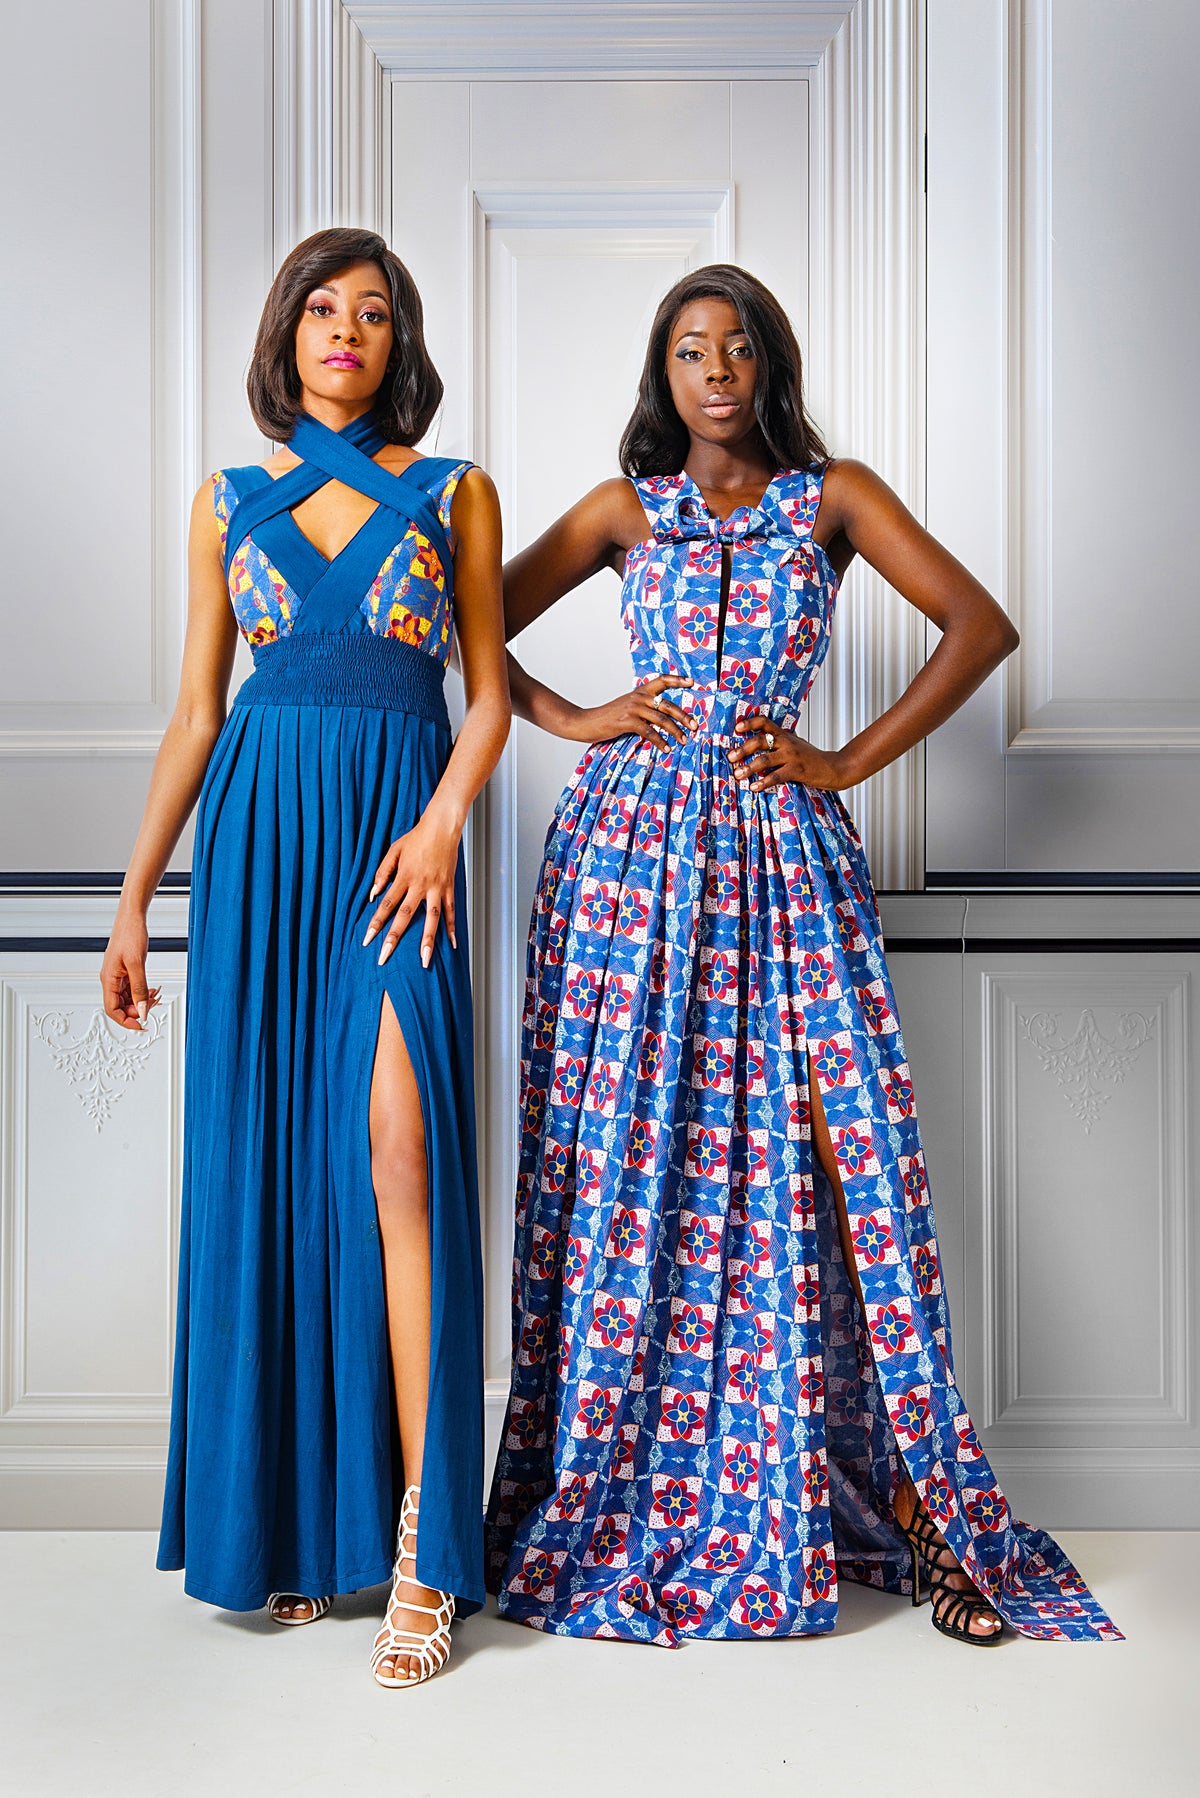 ALLEON offers hand-made, unique, ethical African fashion products in premium quality. Shop modern African clothing: African dresses, African skirts and more. Our Product range includes all sizes from small to extra large.   